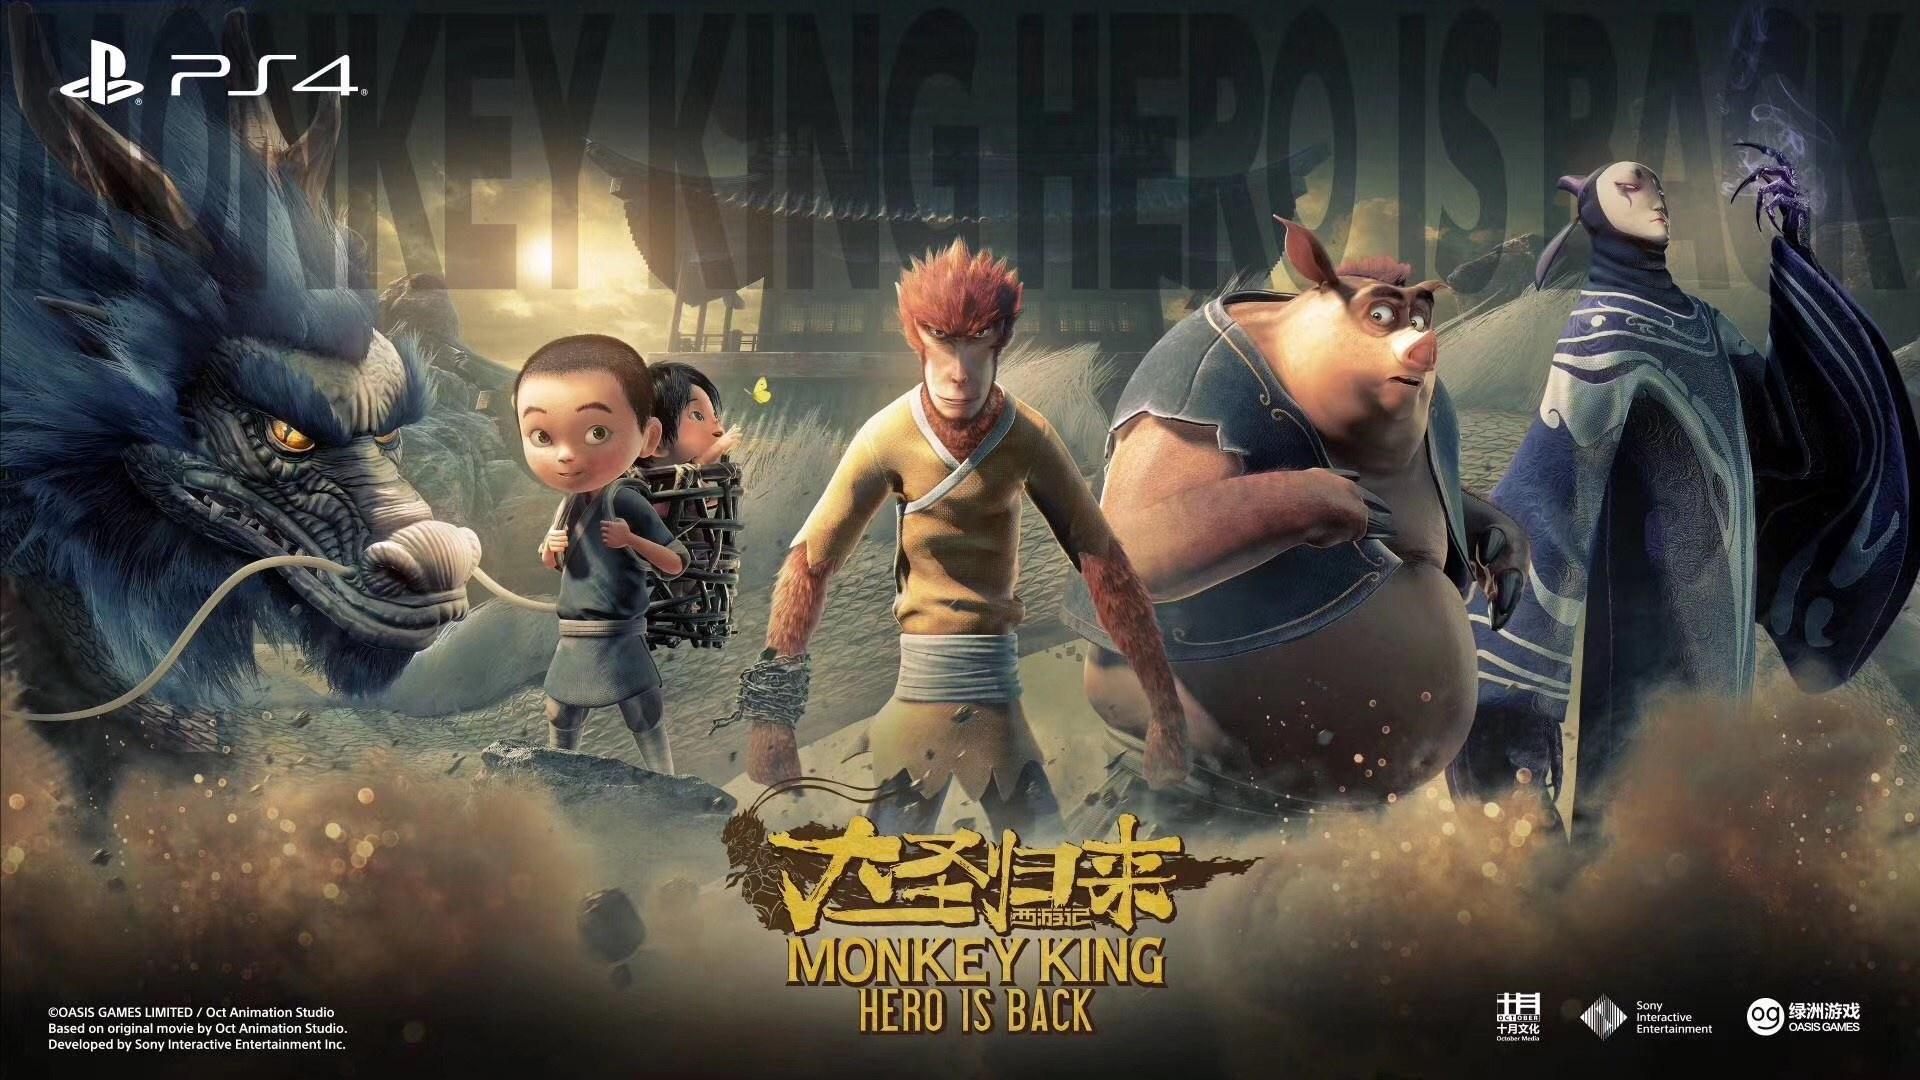 THE MONKEY KING: REBORN - Official Trailer (2021) - YouTube